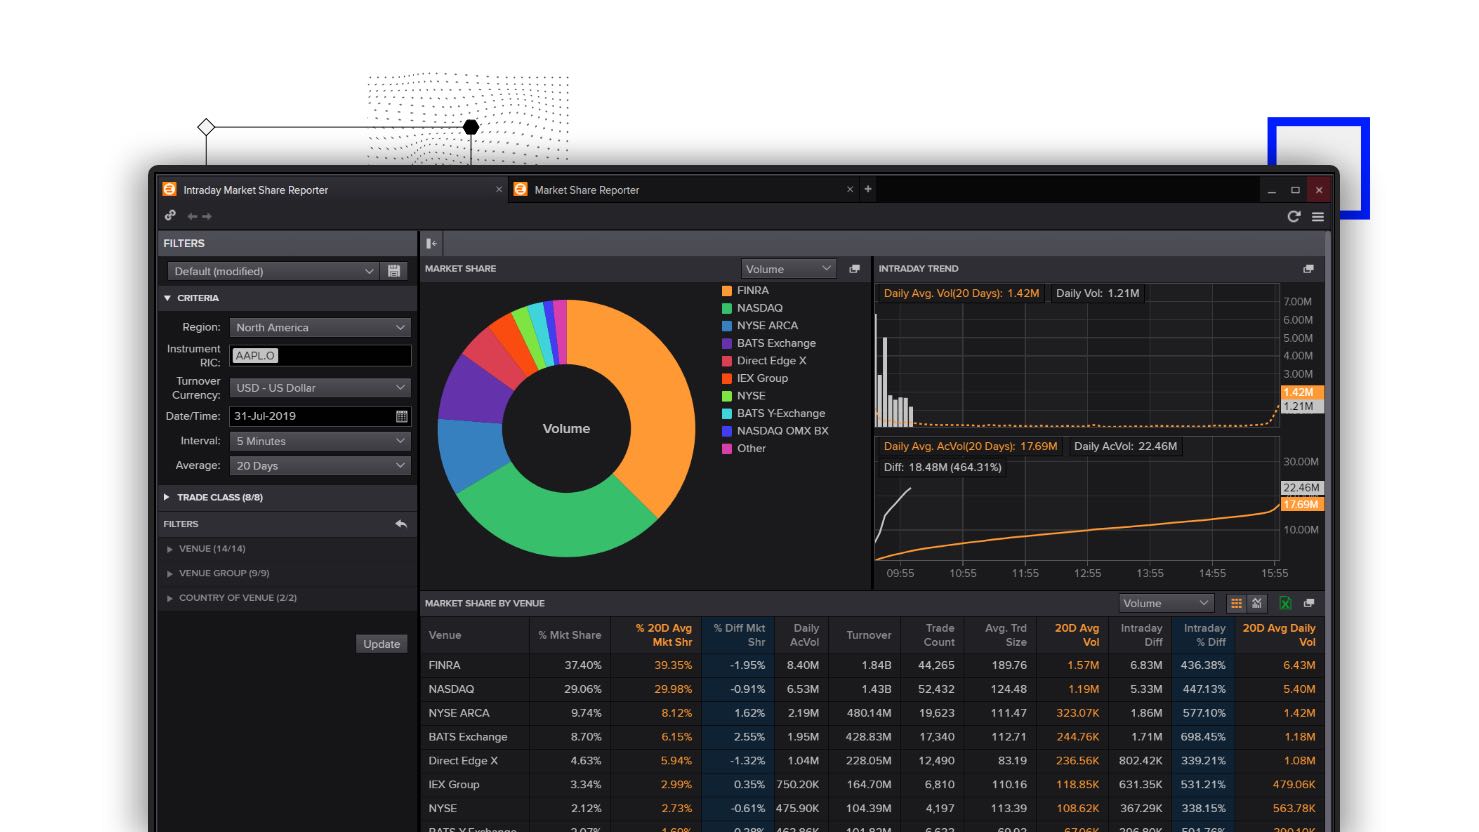 Liquidity search is made easier with Intraday Market Share Reporter in Eikon